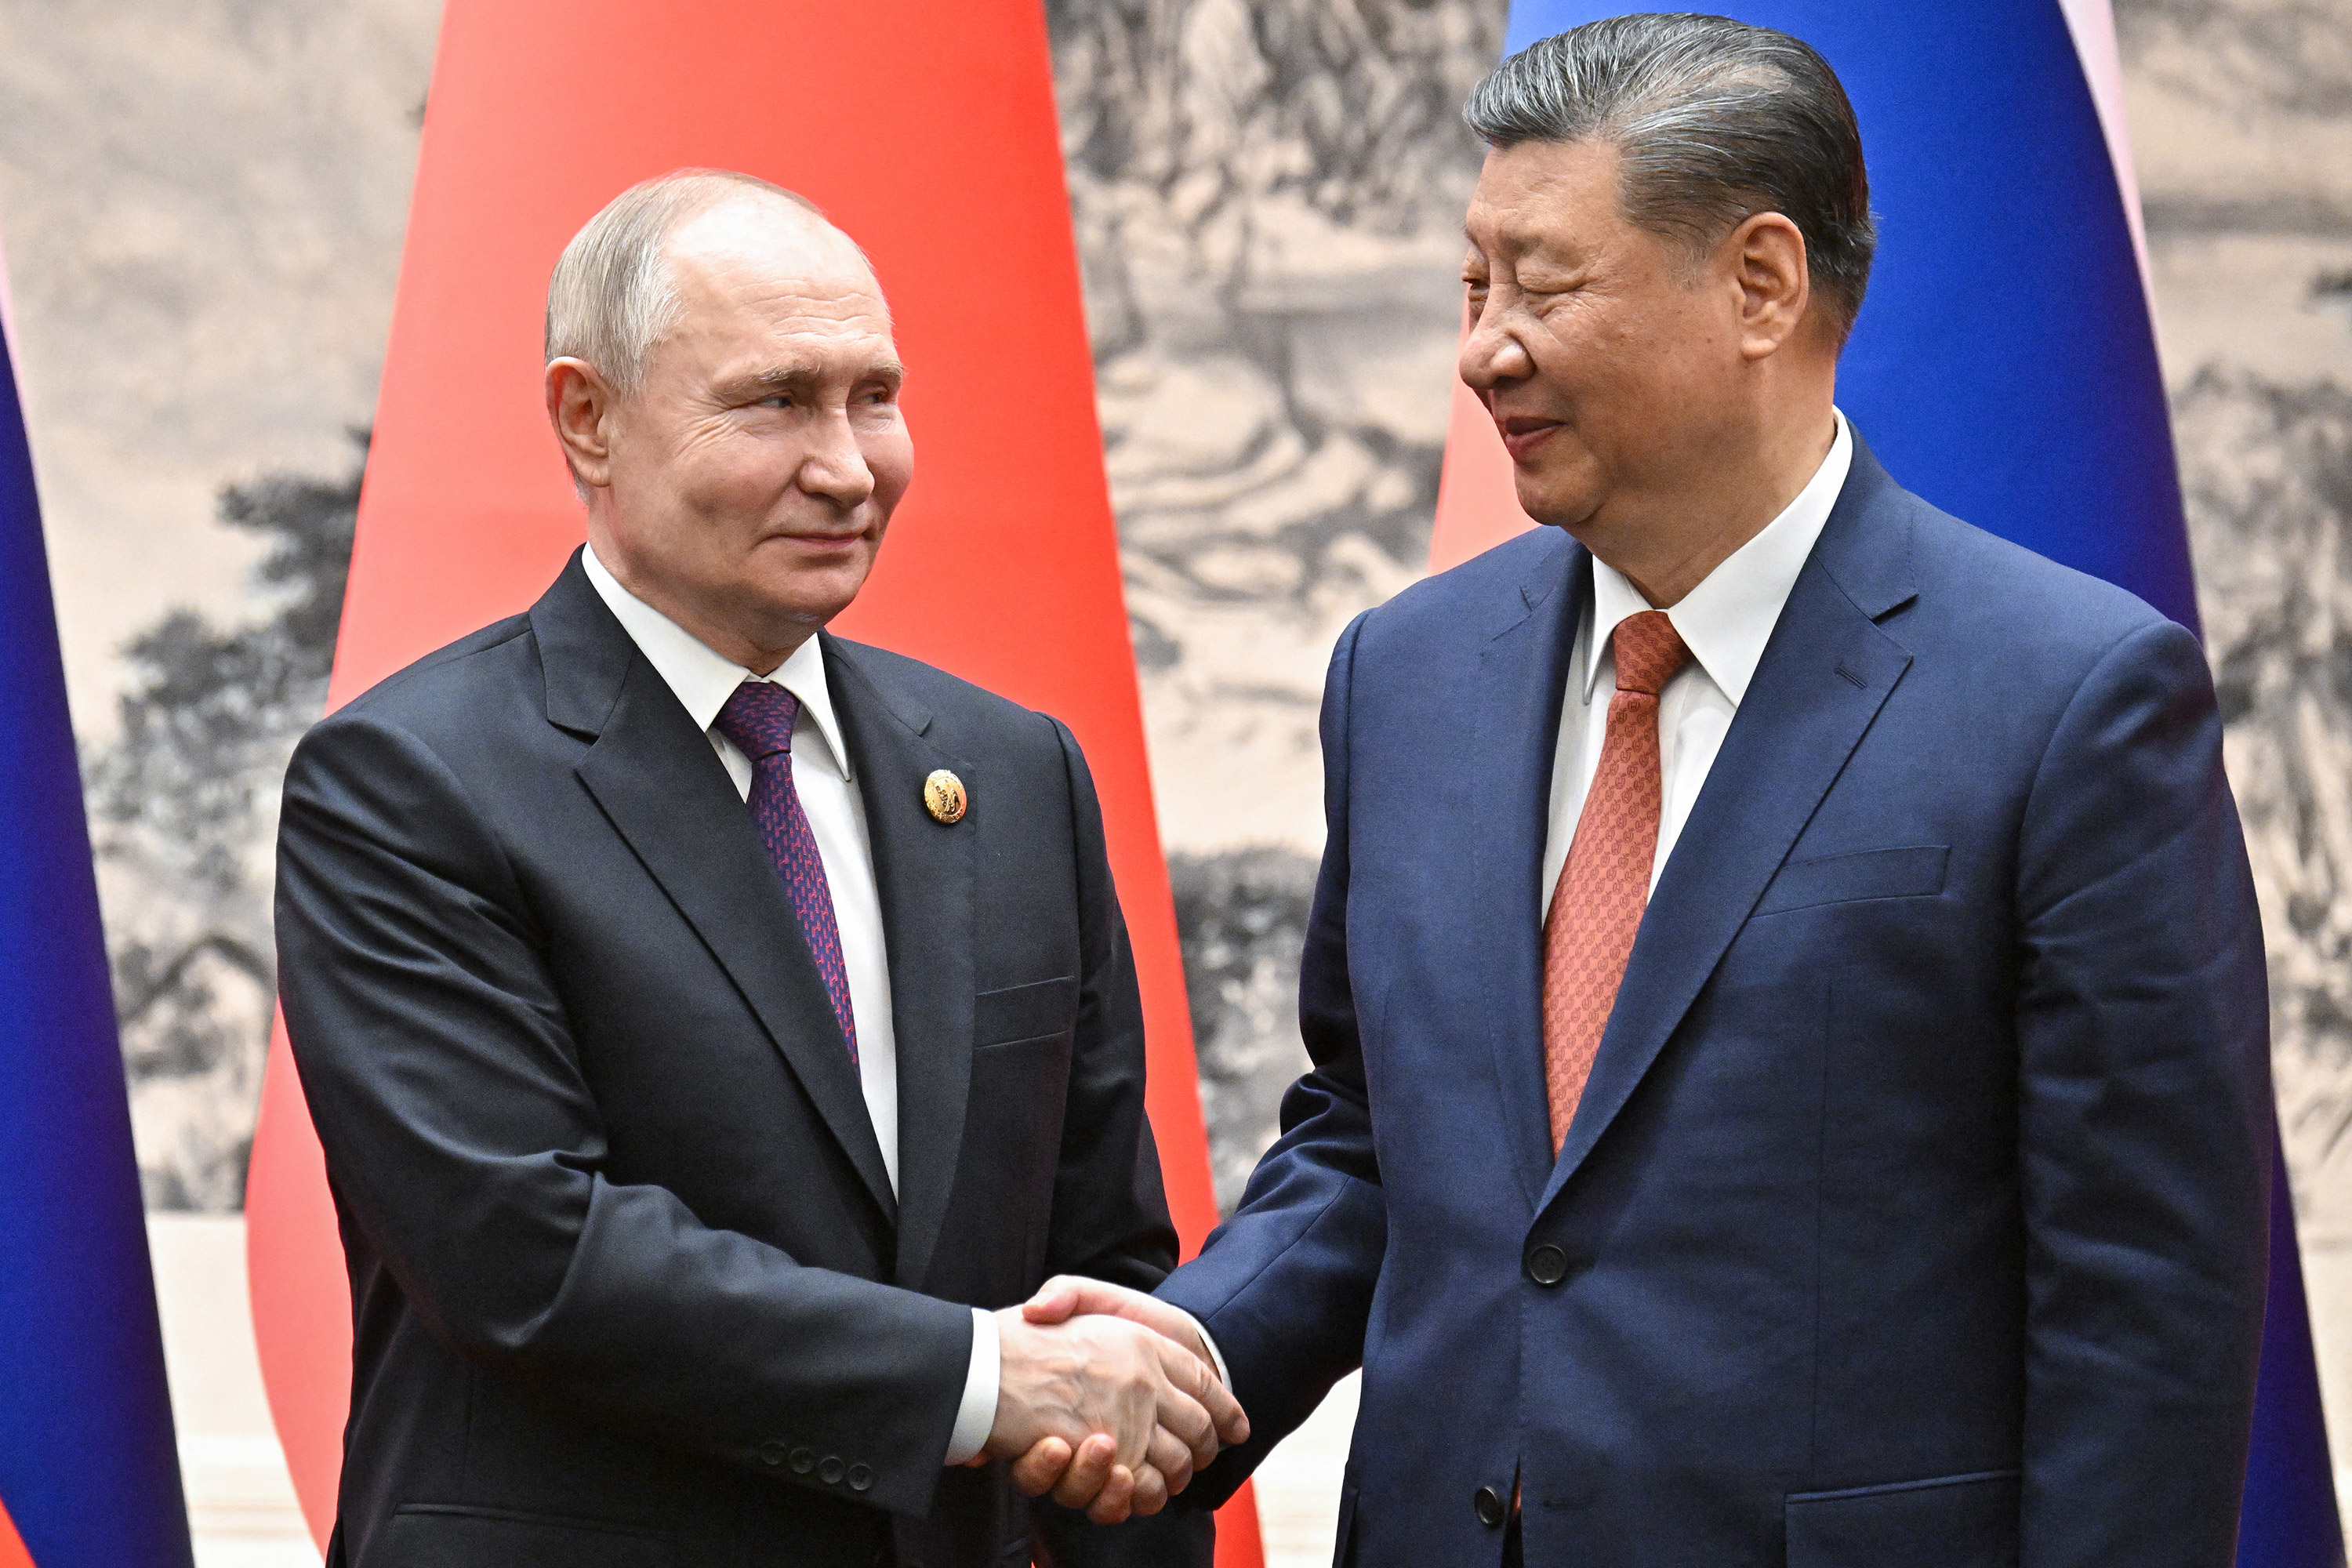 Russian President Vladimir Putin and Chinese President Xi Jinping shake hands following their talks in Beijing on Thursday.